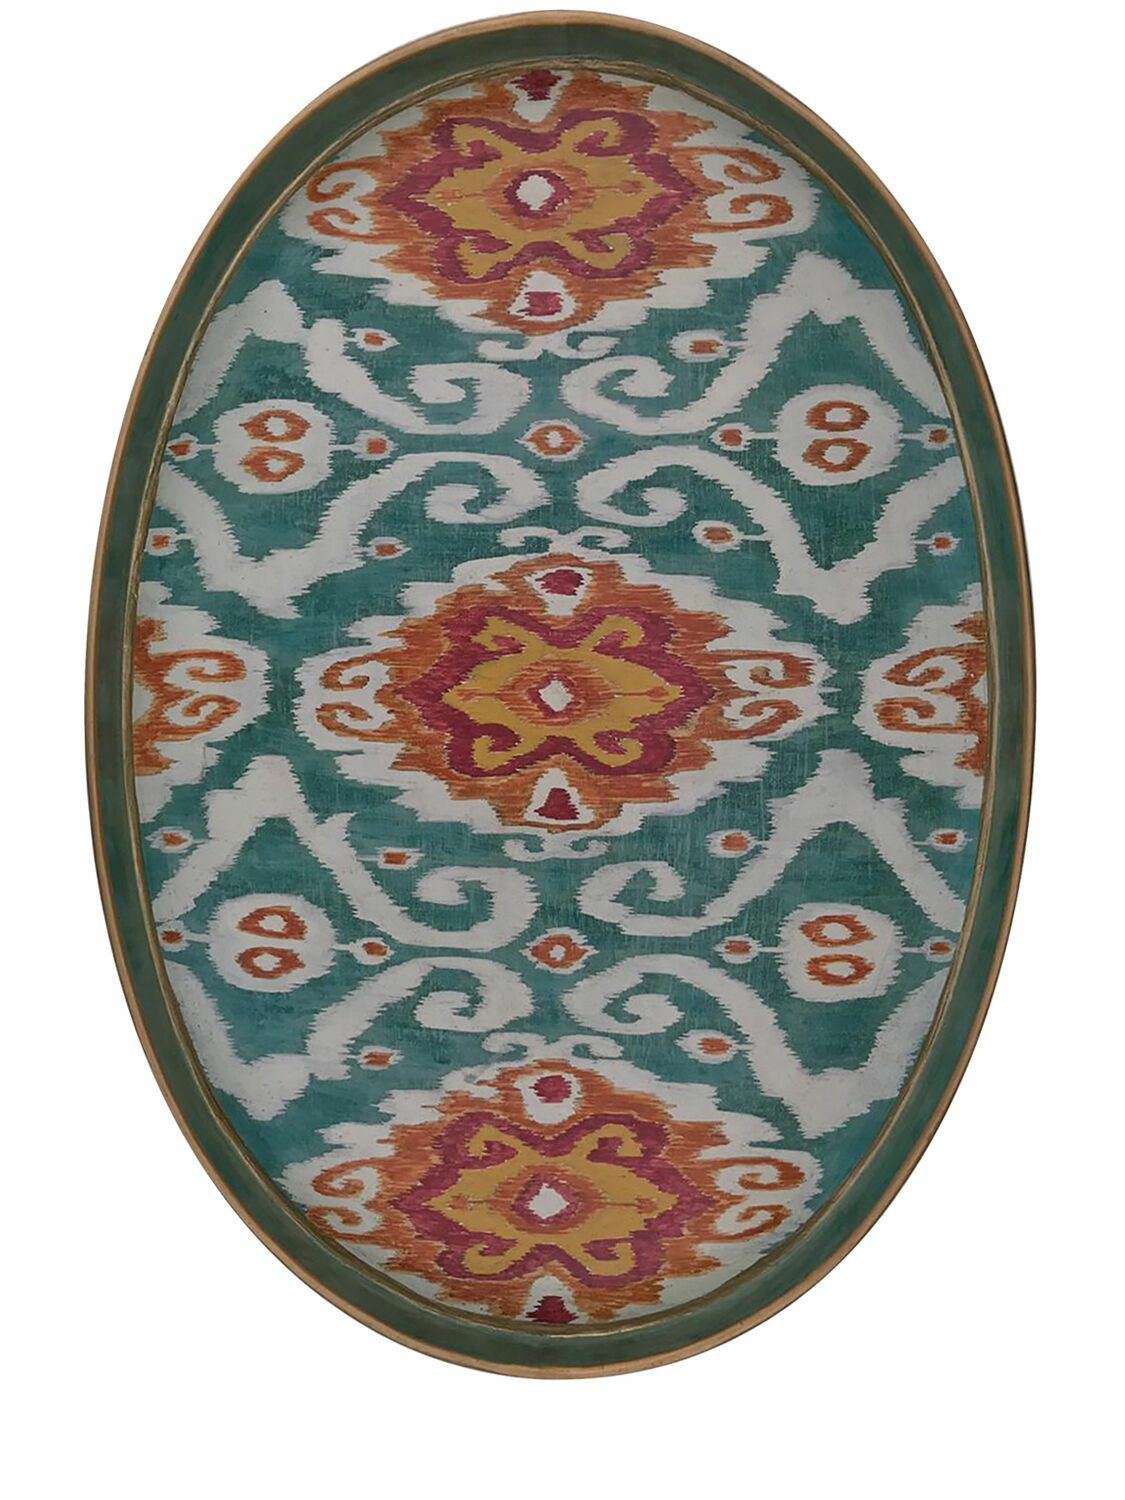 LES OTTOMANS Ikat Hand-painted Iron Tray